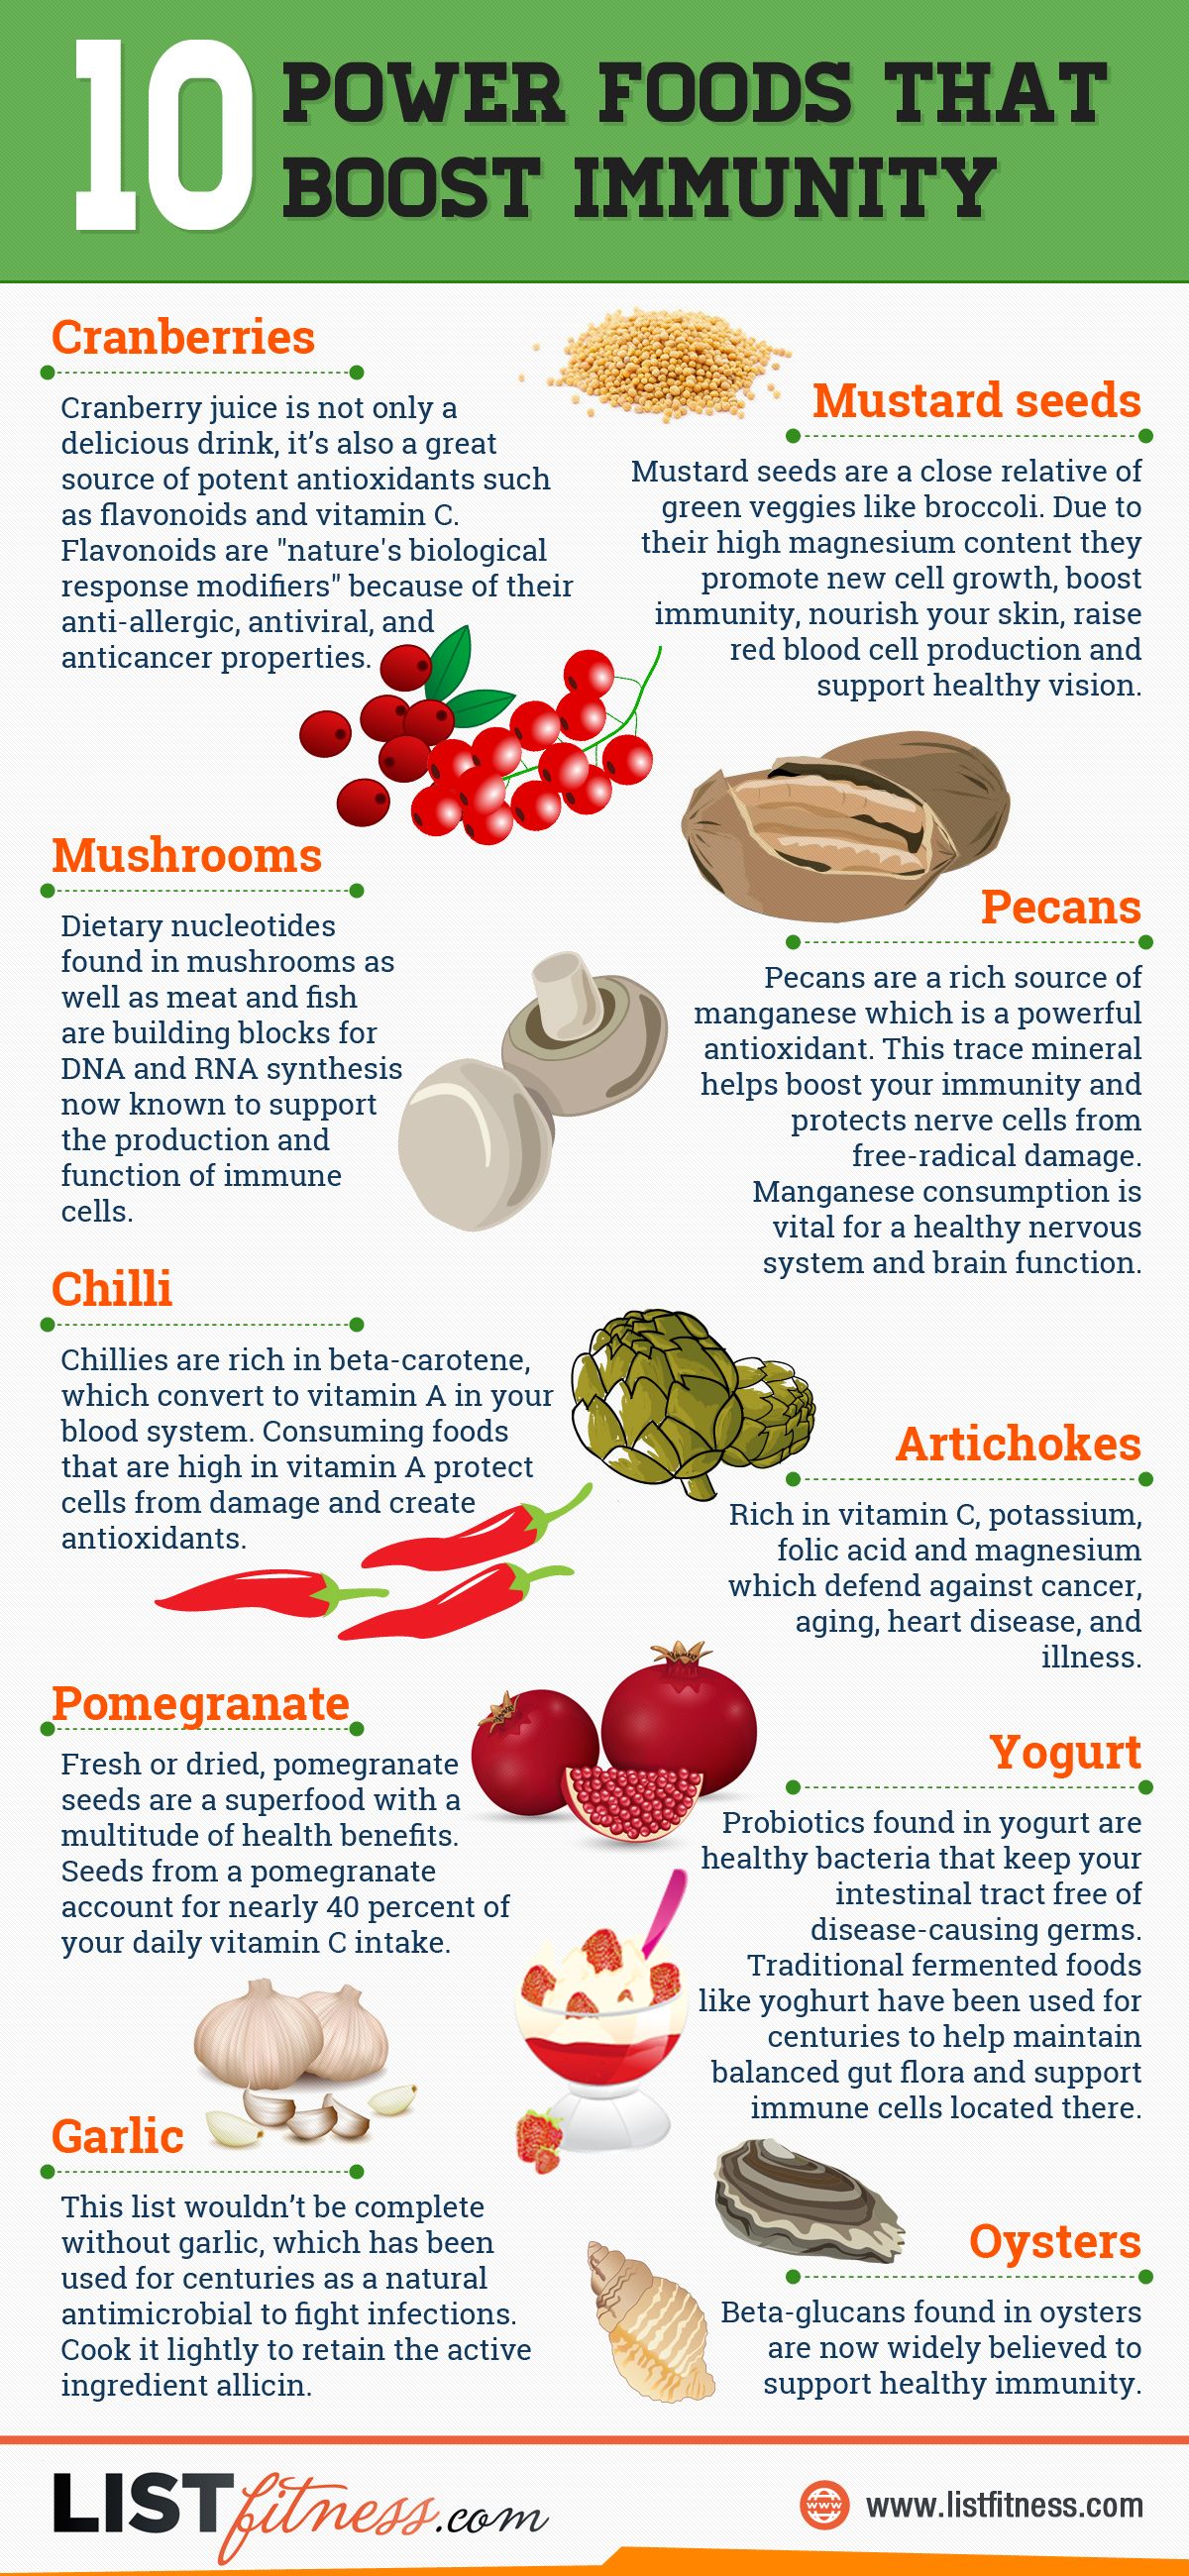 10-Power-Foods-That-Boost-Immunity